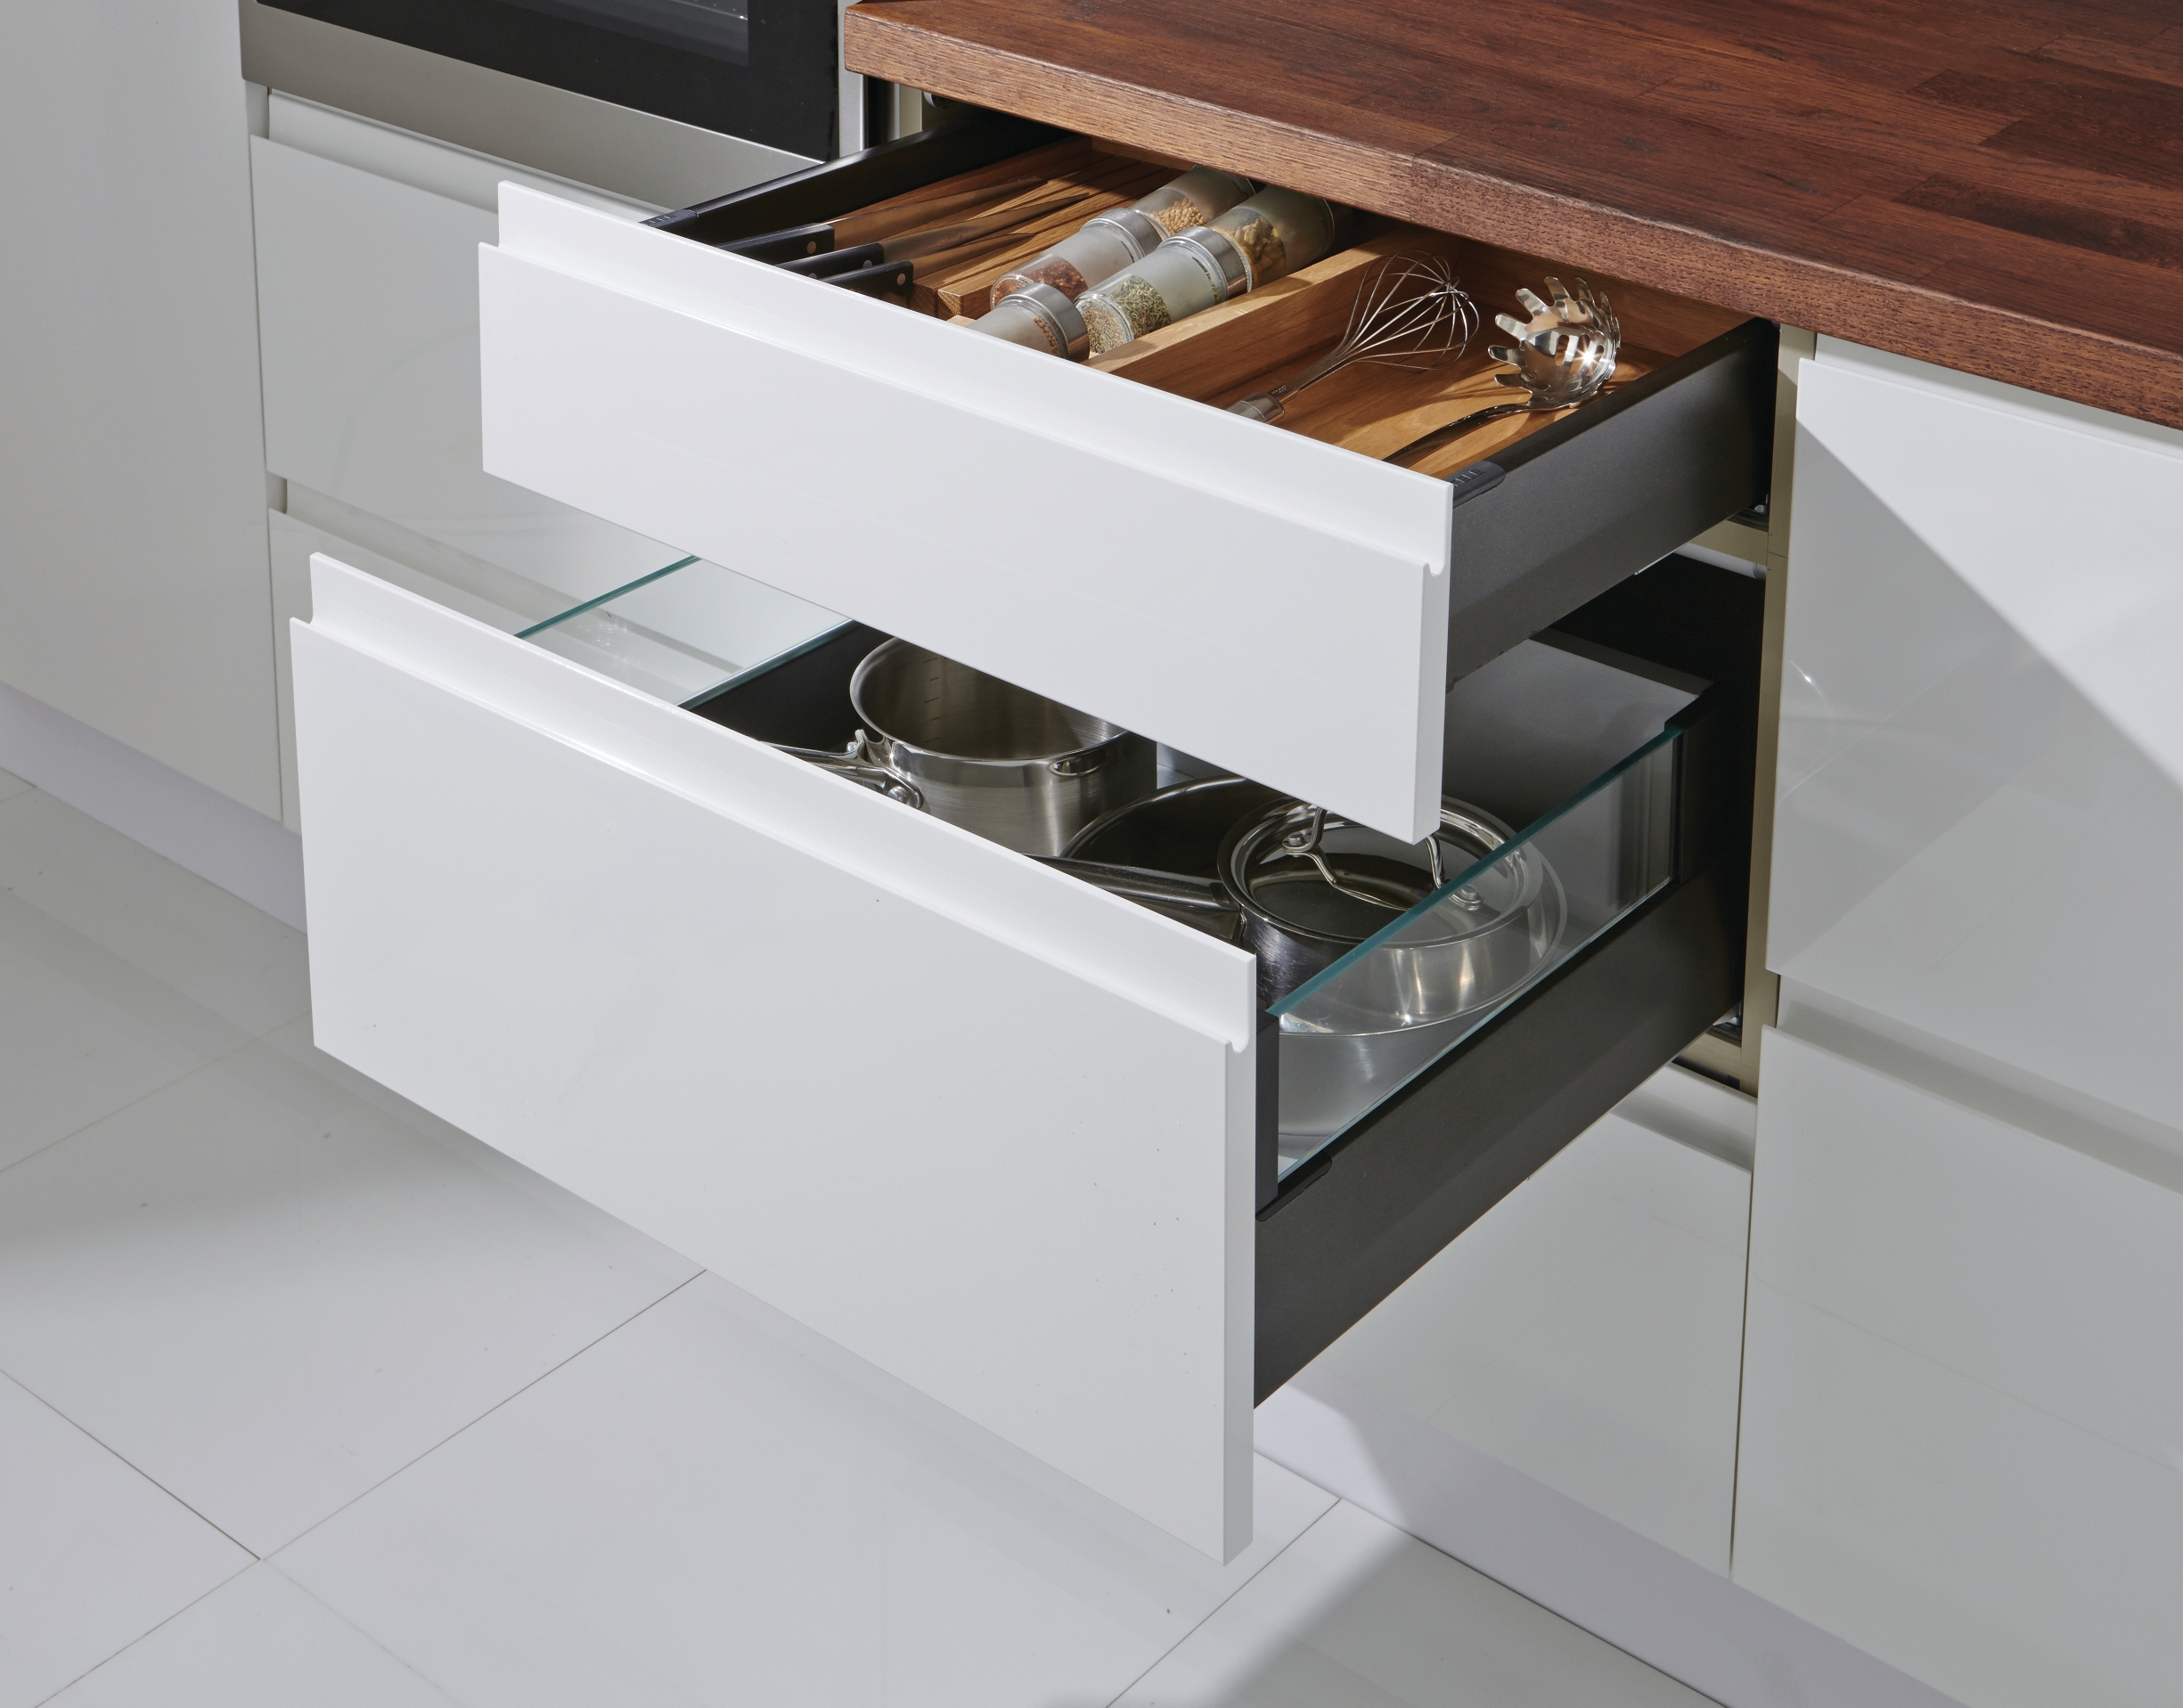 Introducing Häfele's MatrixBox Premium Drawer System: German Engineered with Cutting-Edge Technology and Trendy Finishes.